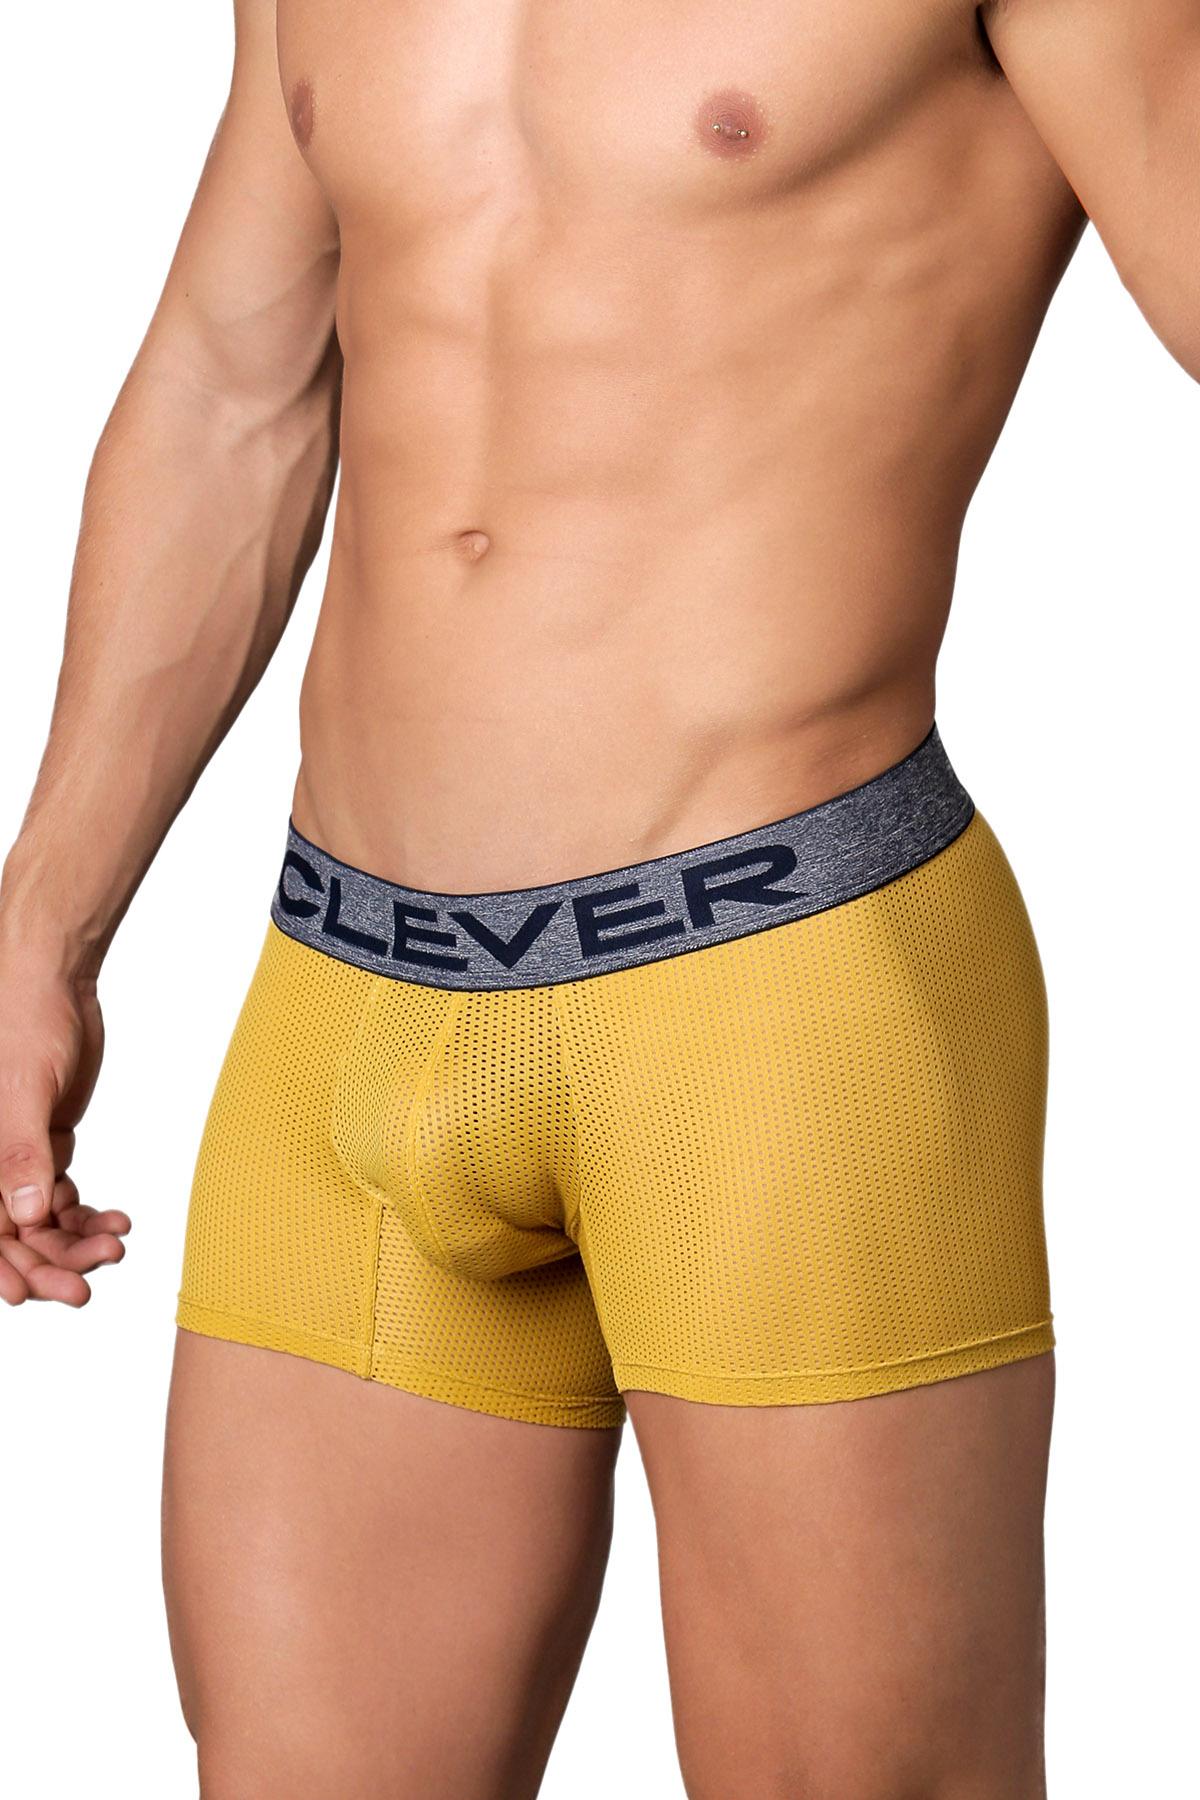 Clever Gold Limited Edition Mesh Trunk